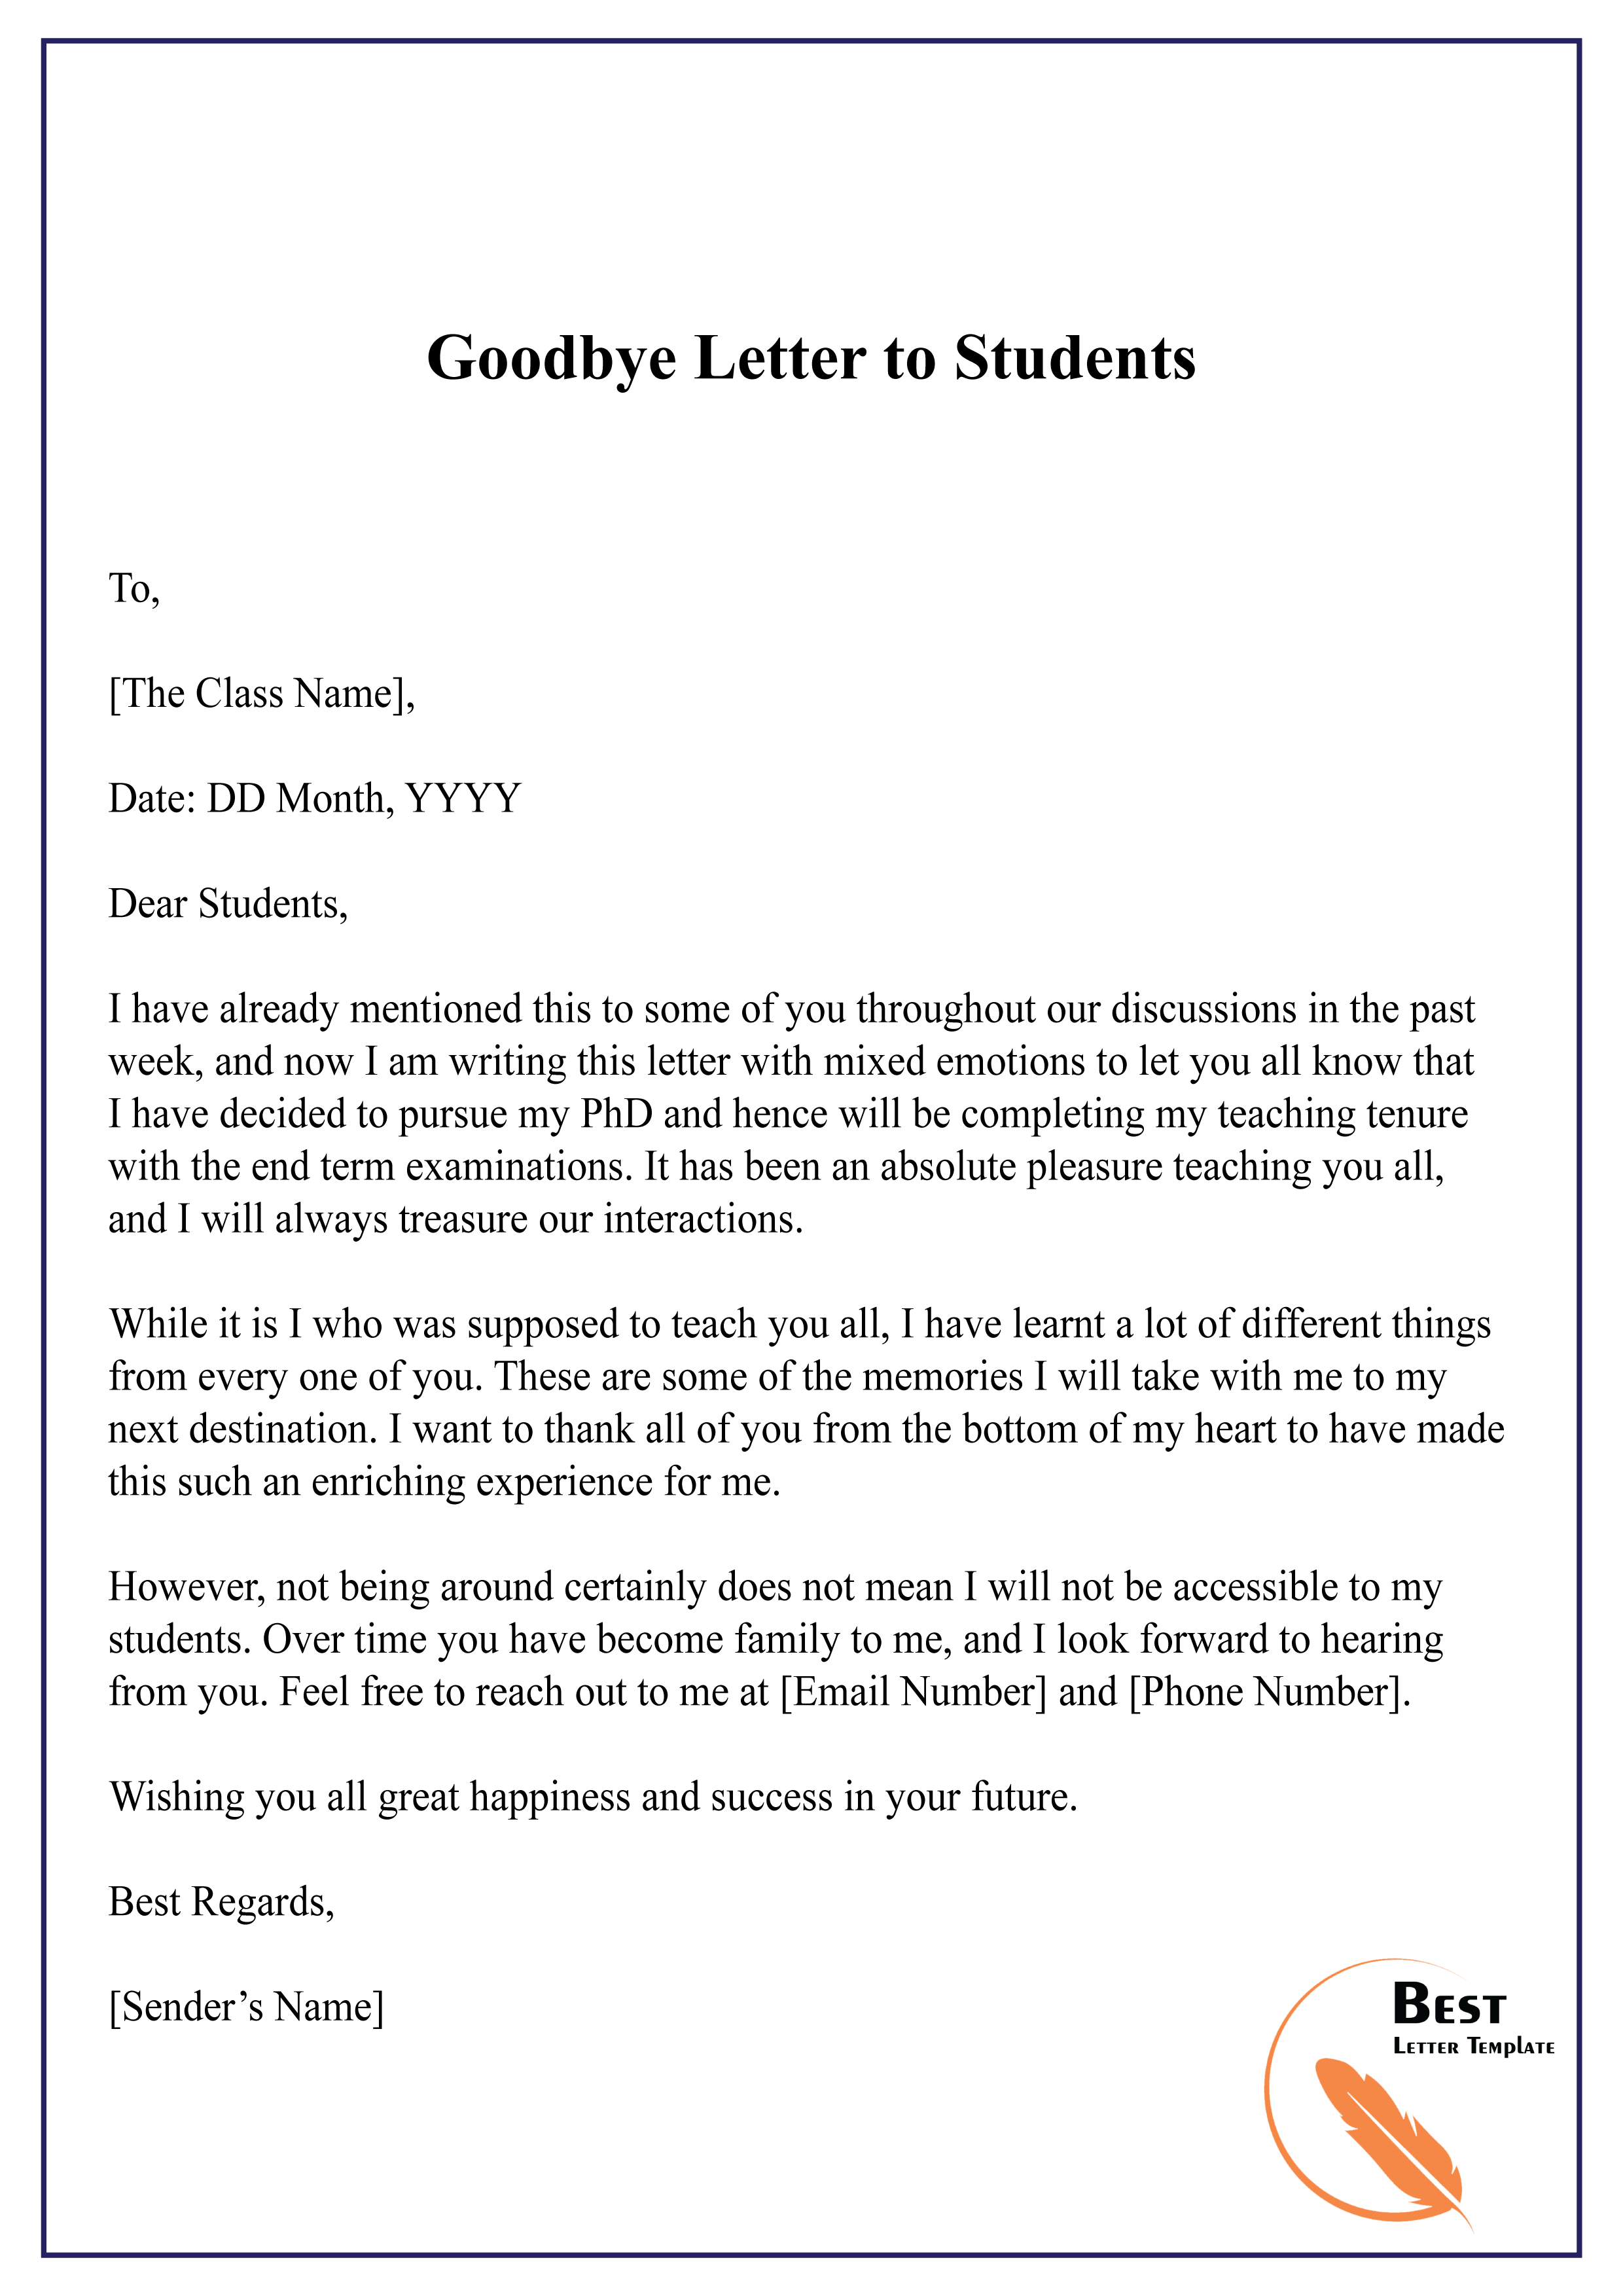 goodbye-letter-to-students-01-best-letter-template